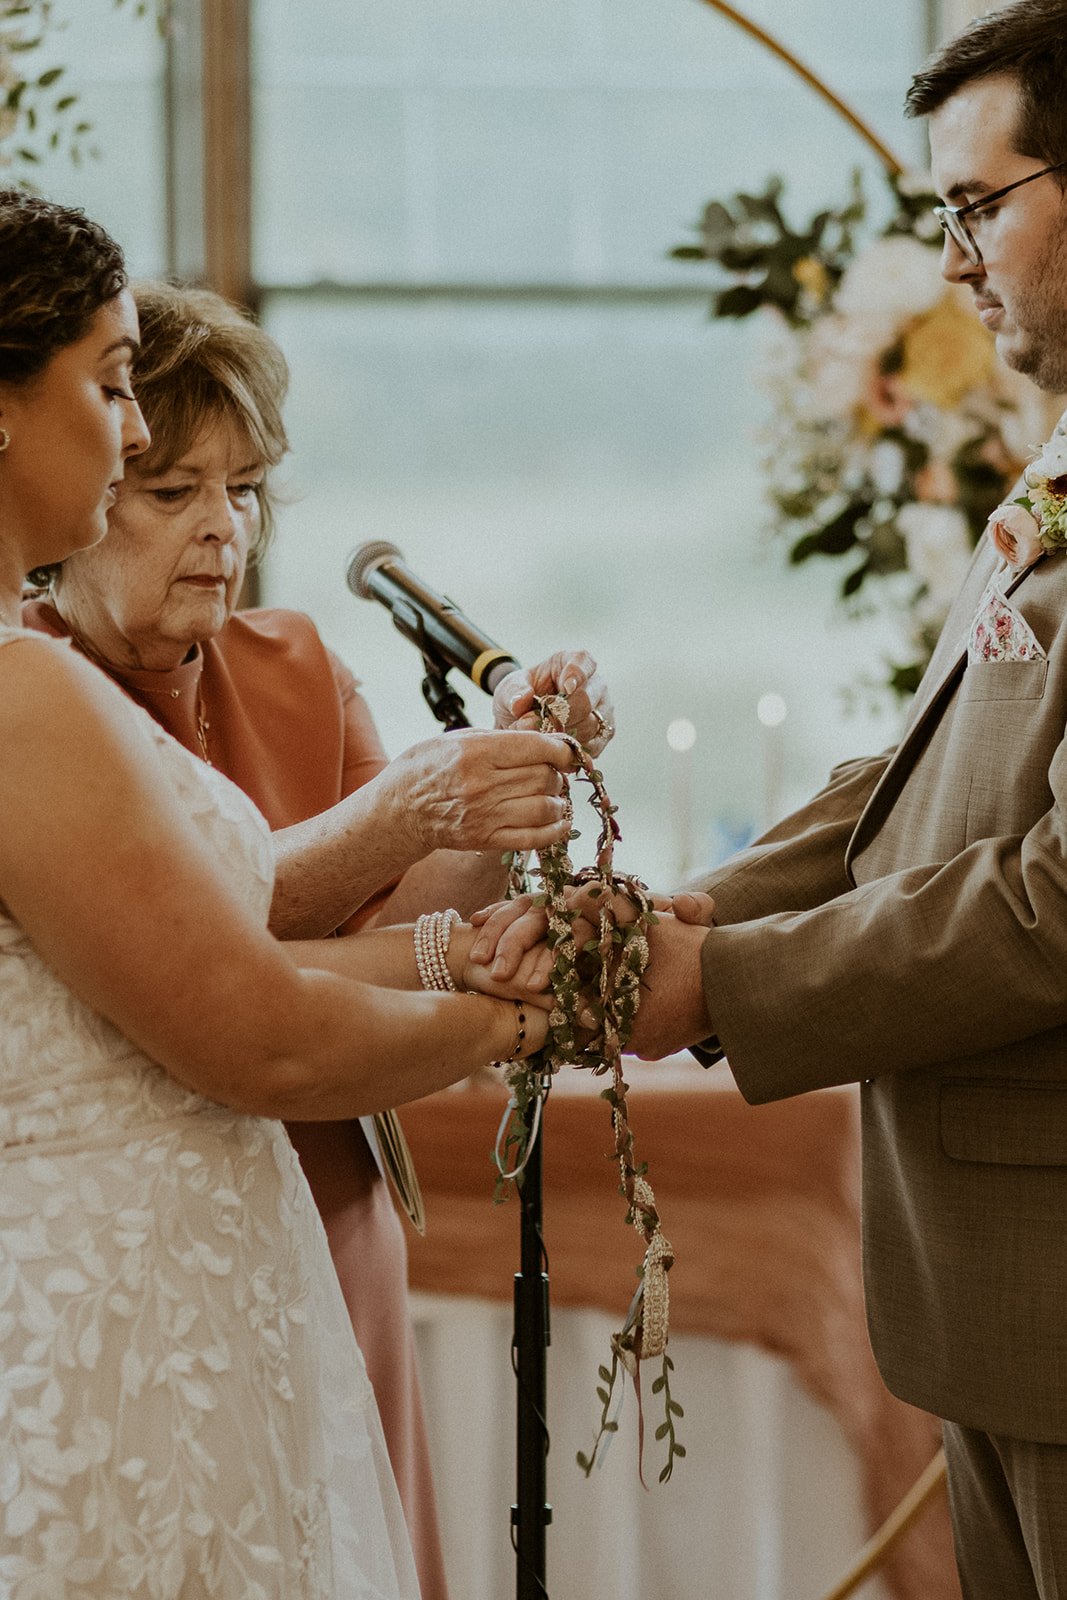 Bride and groom doing their handfasting during their ceremony.